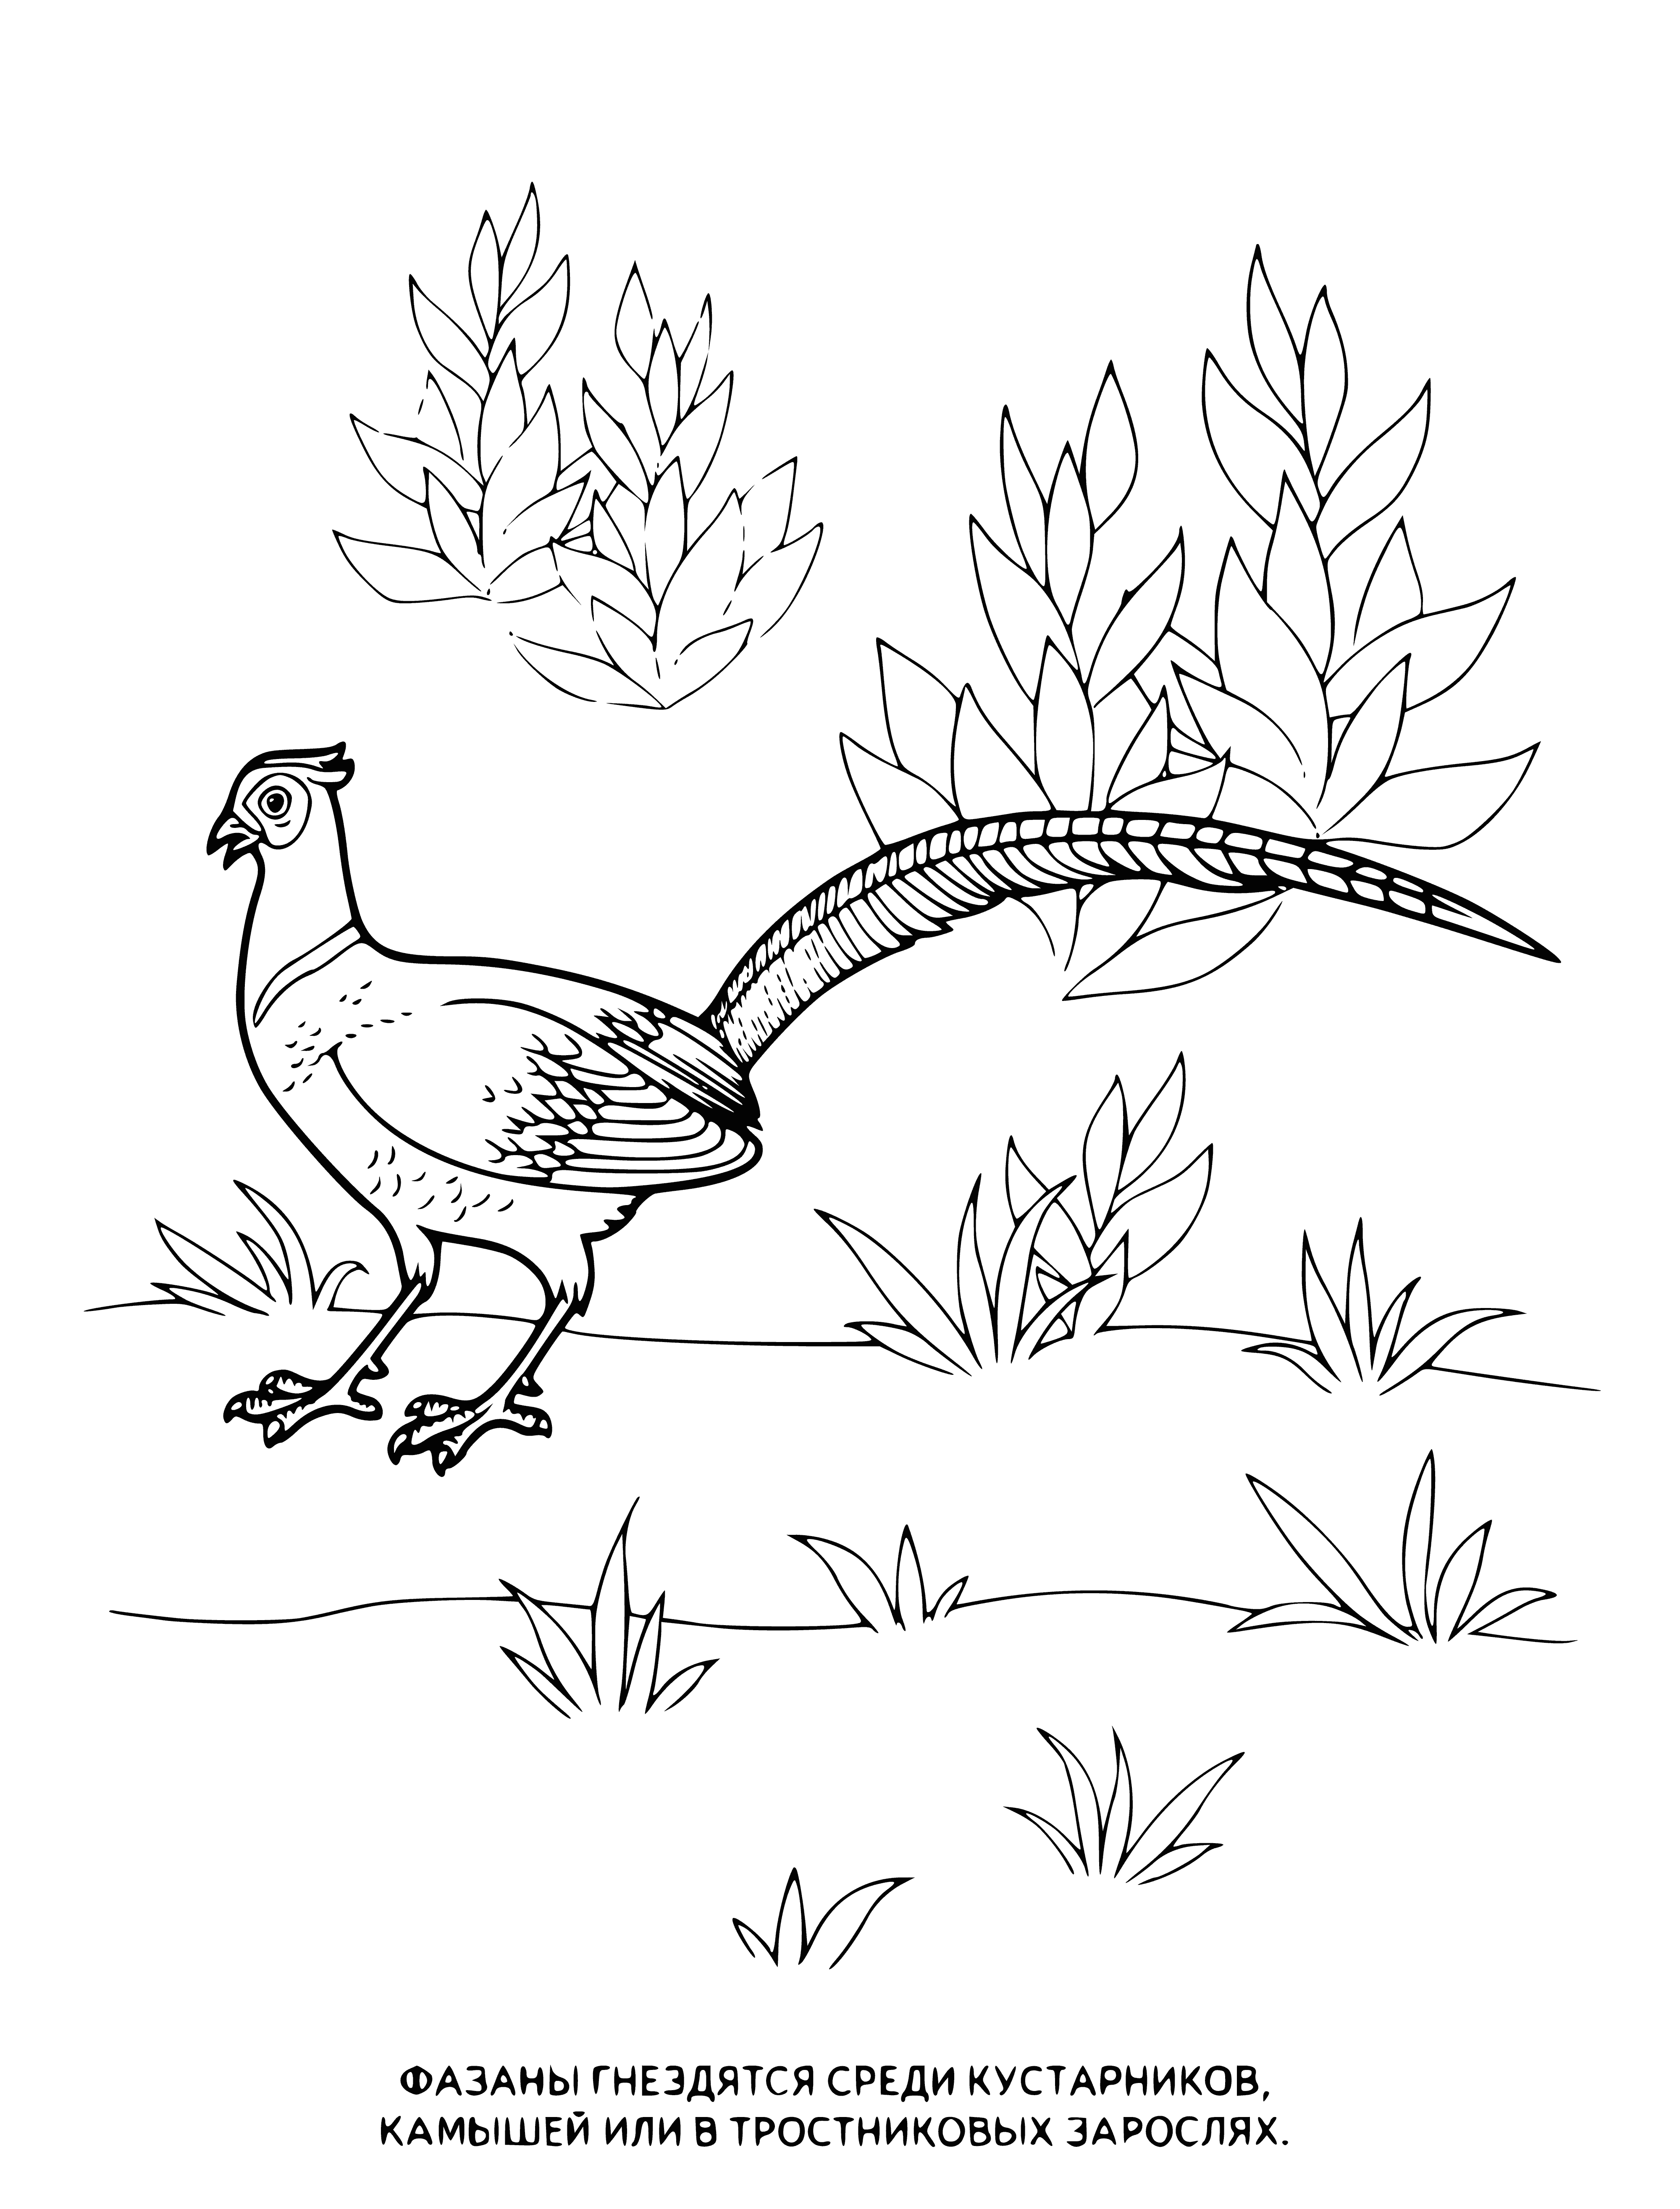 coloring page: Long-tailed, light brown bird w/darker stripes on back, standing on a dirt road in grassy field w/fence in background.